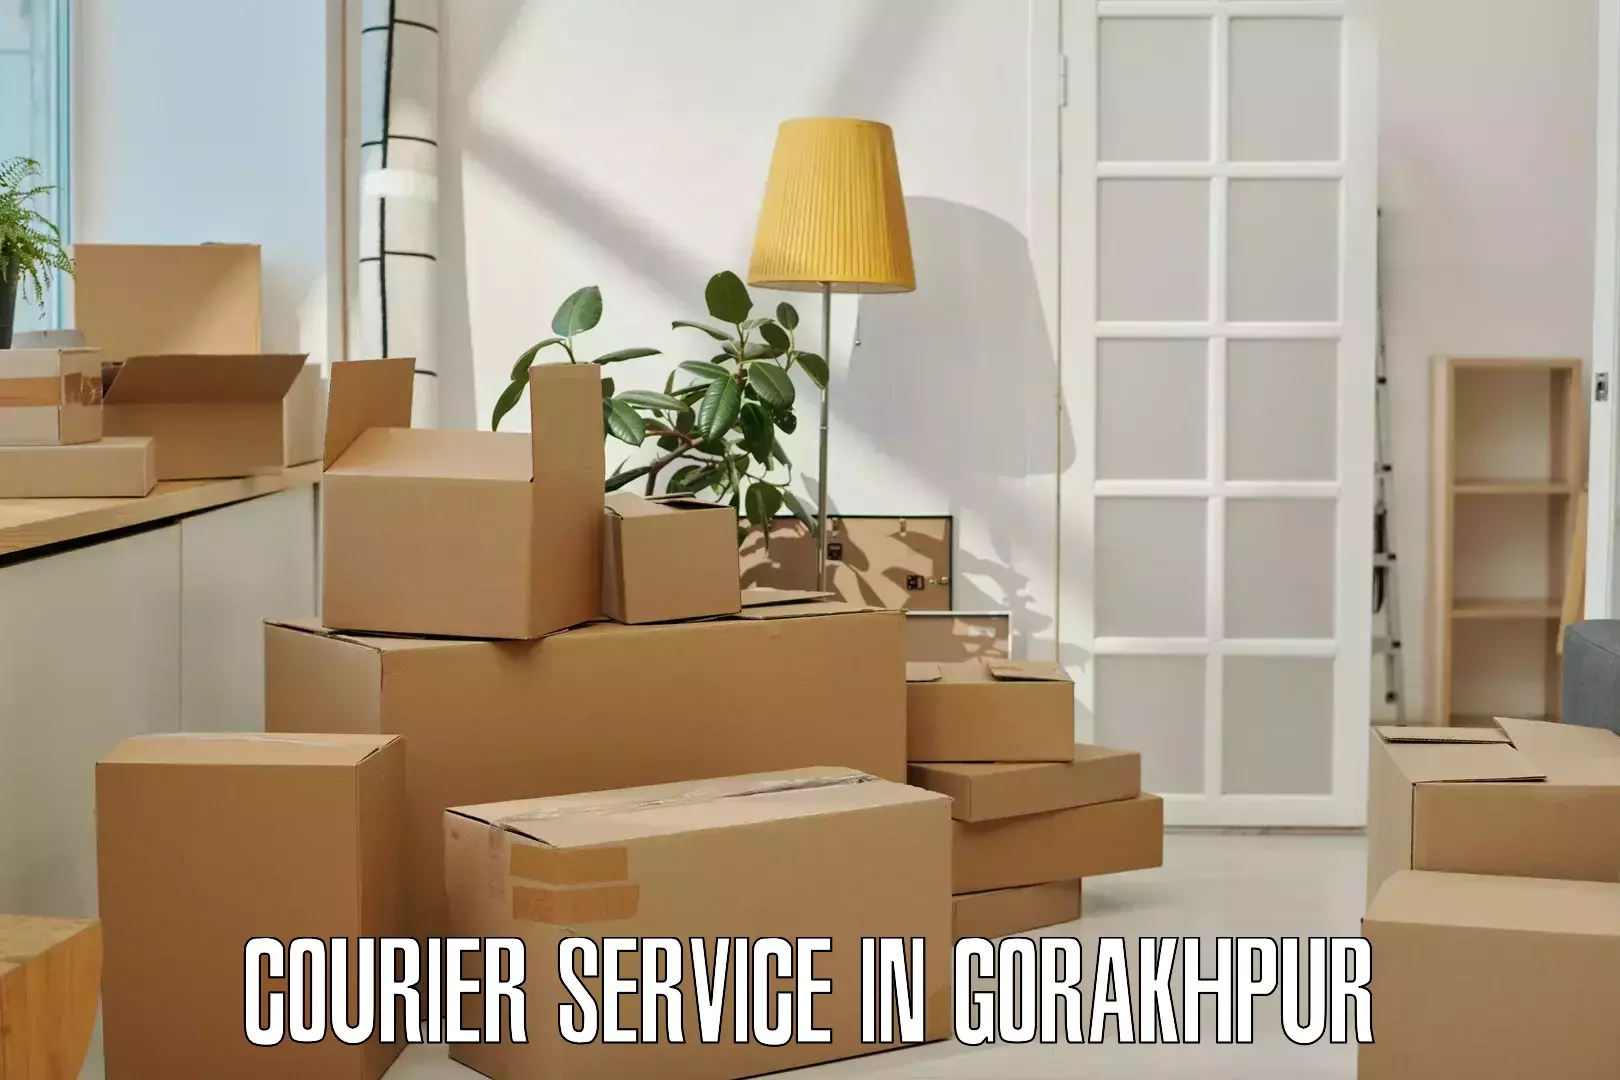 End-to-end delivery in Gorakhpur